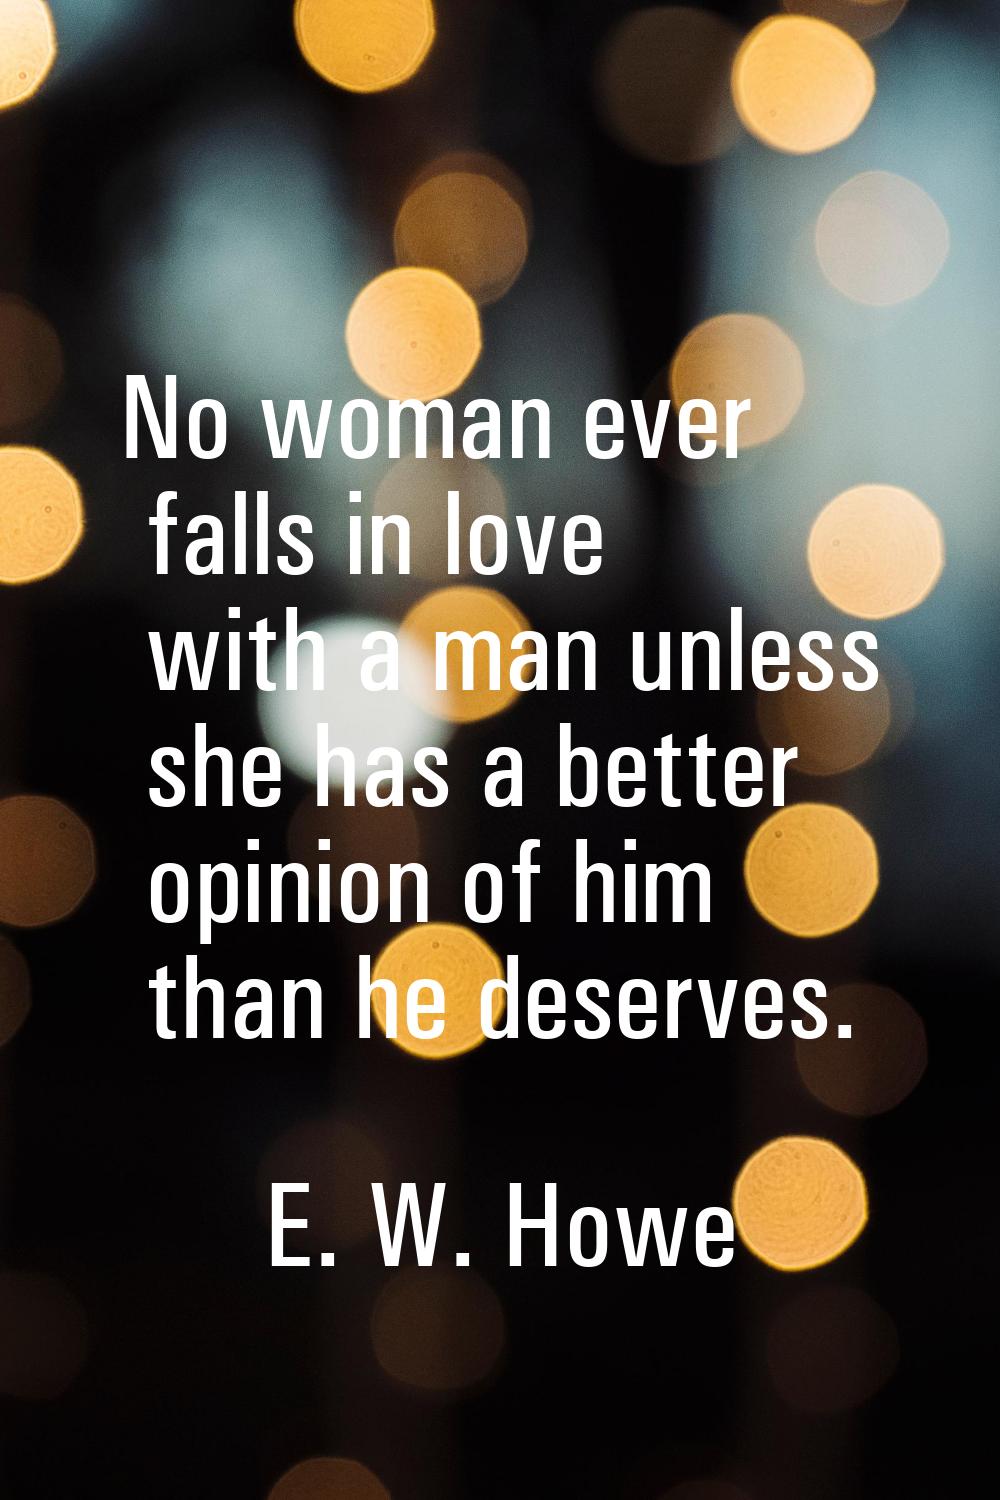 No woman ever falls in love with a man unless she has a better opinion of him than he deserves.